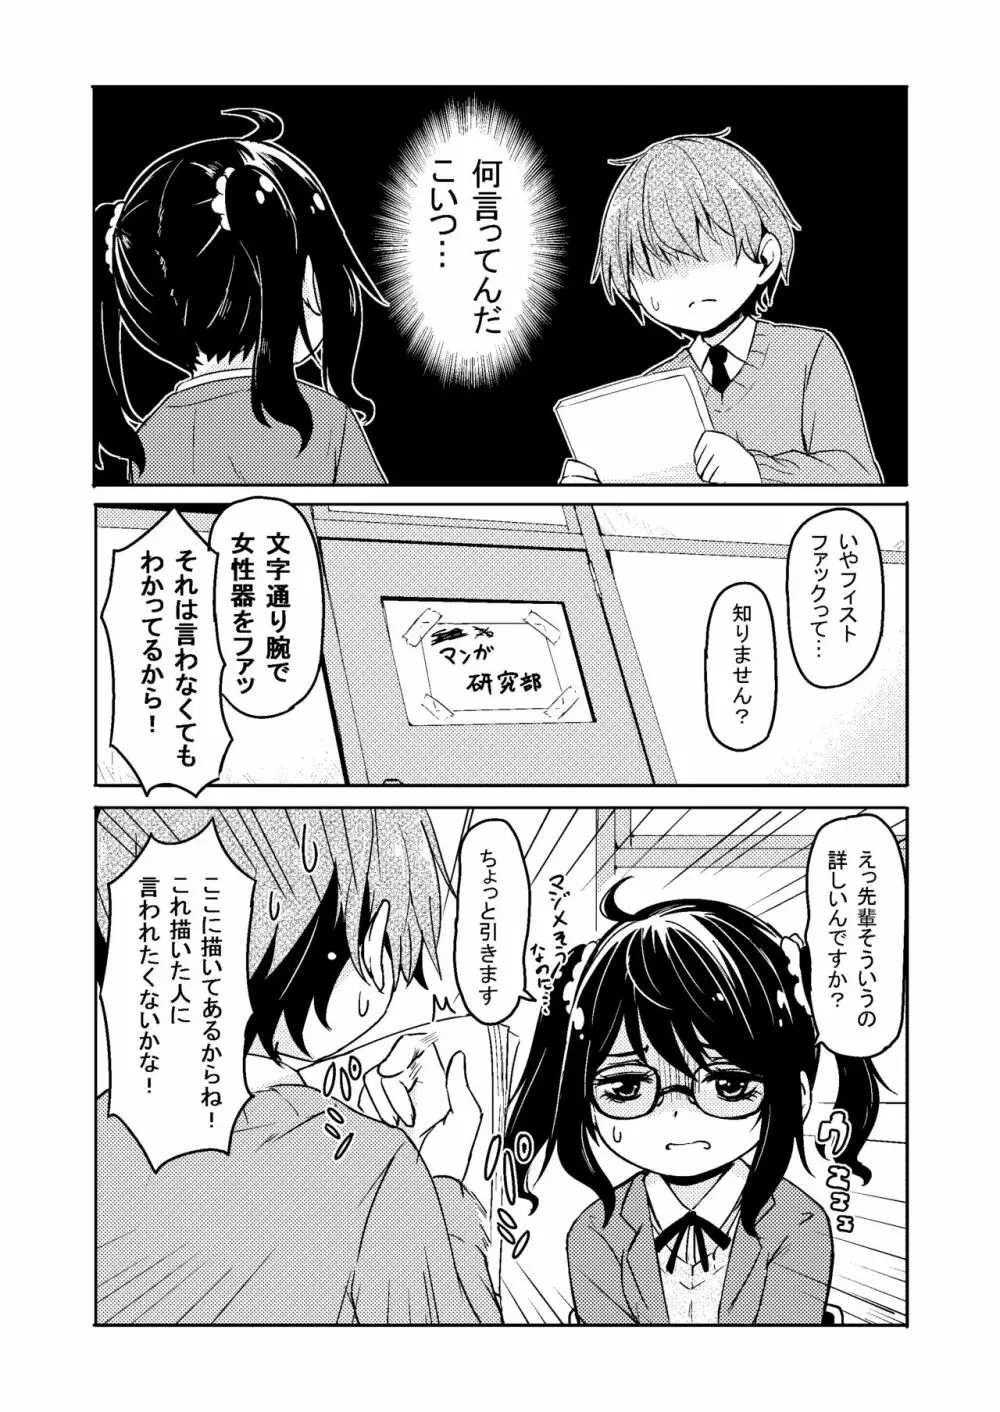 Don't scare Be born + ボツったマンガです。 - page29